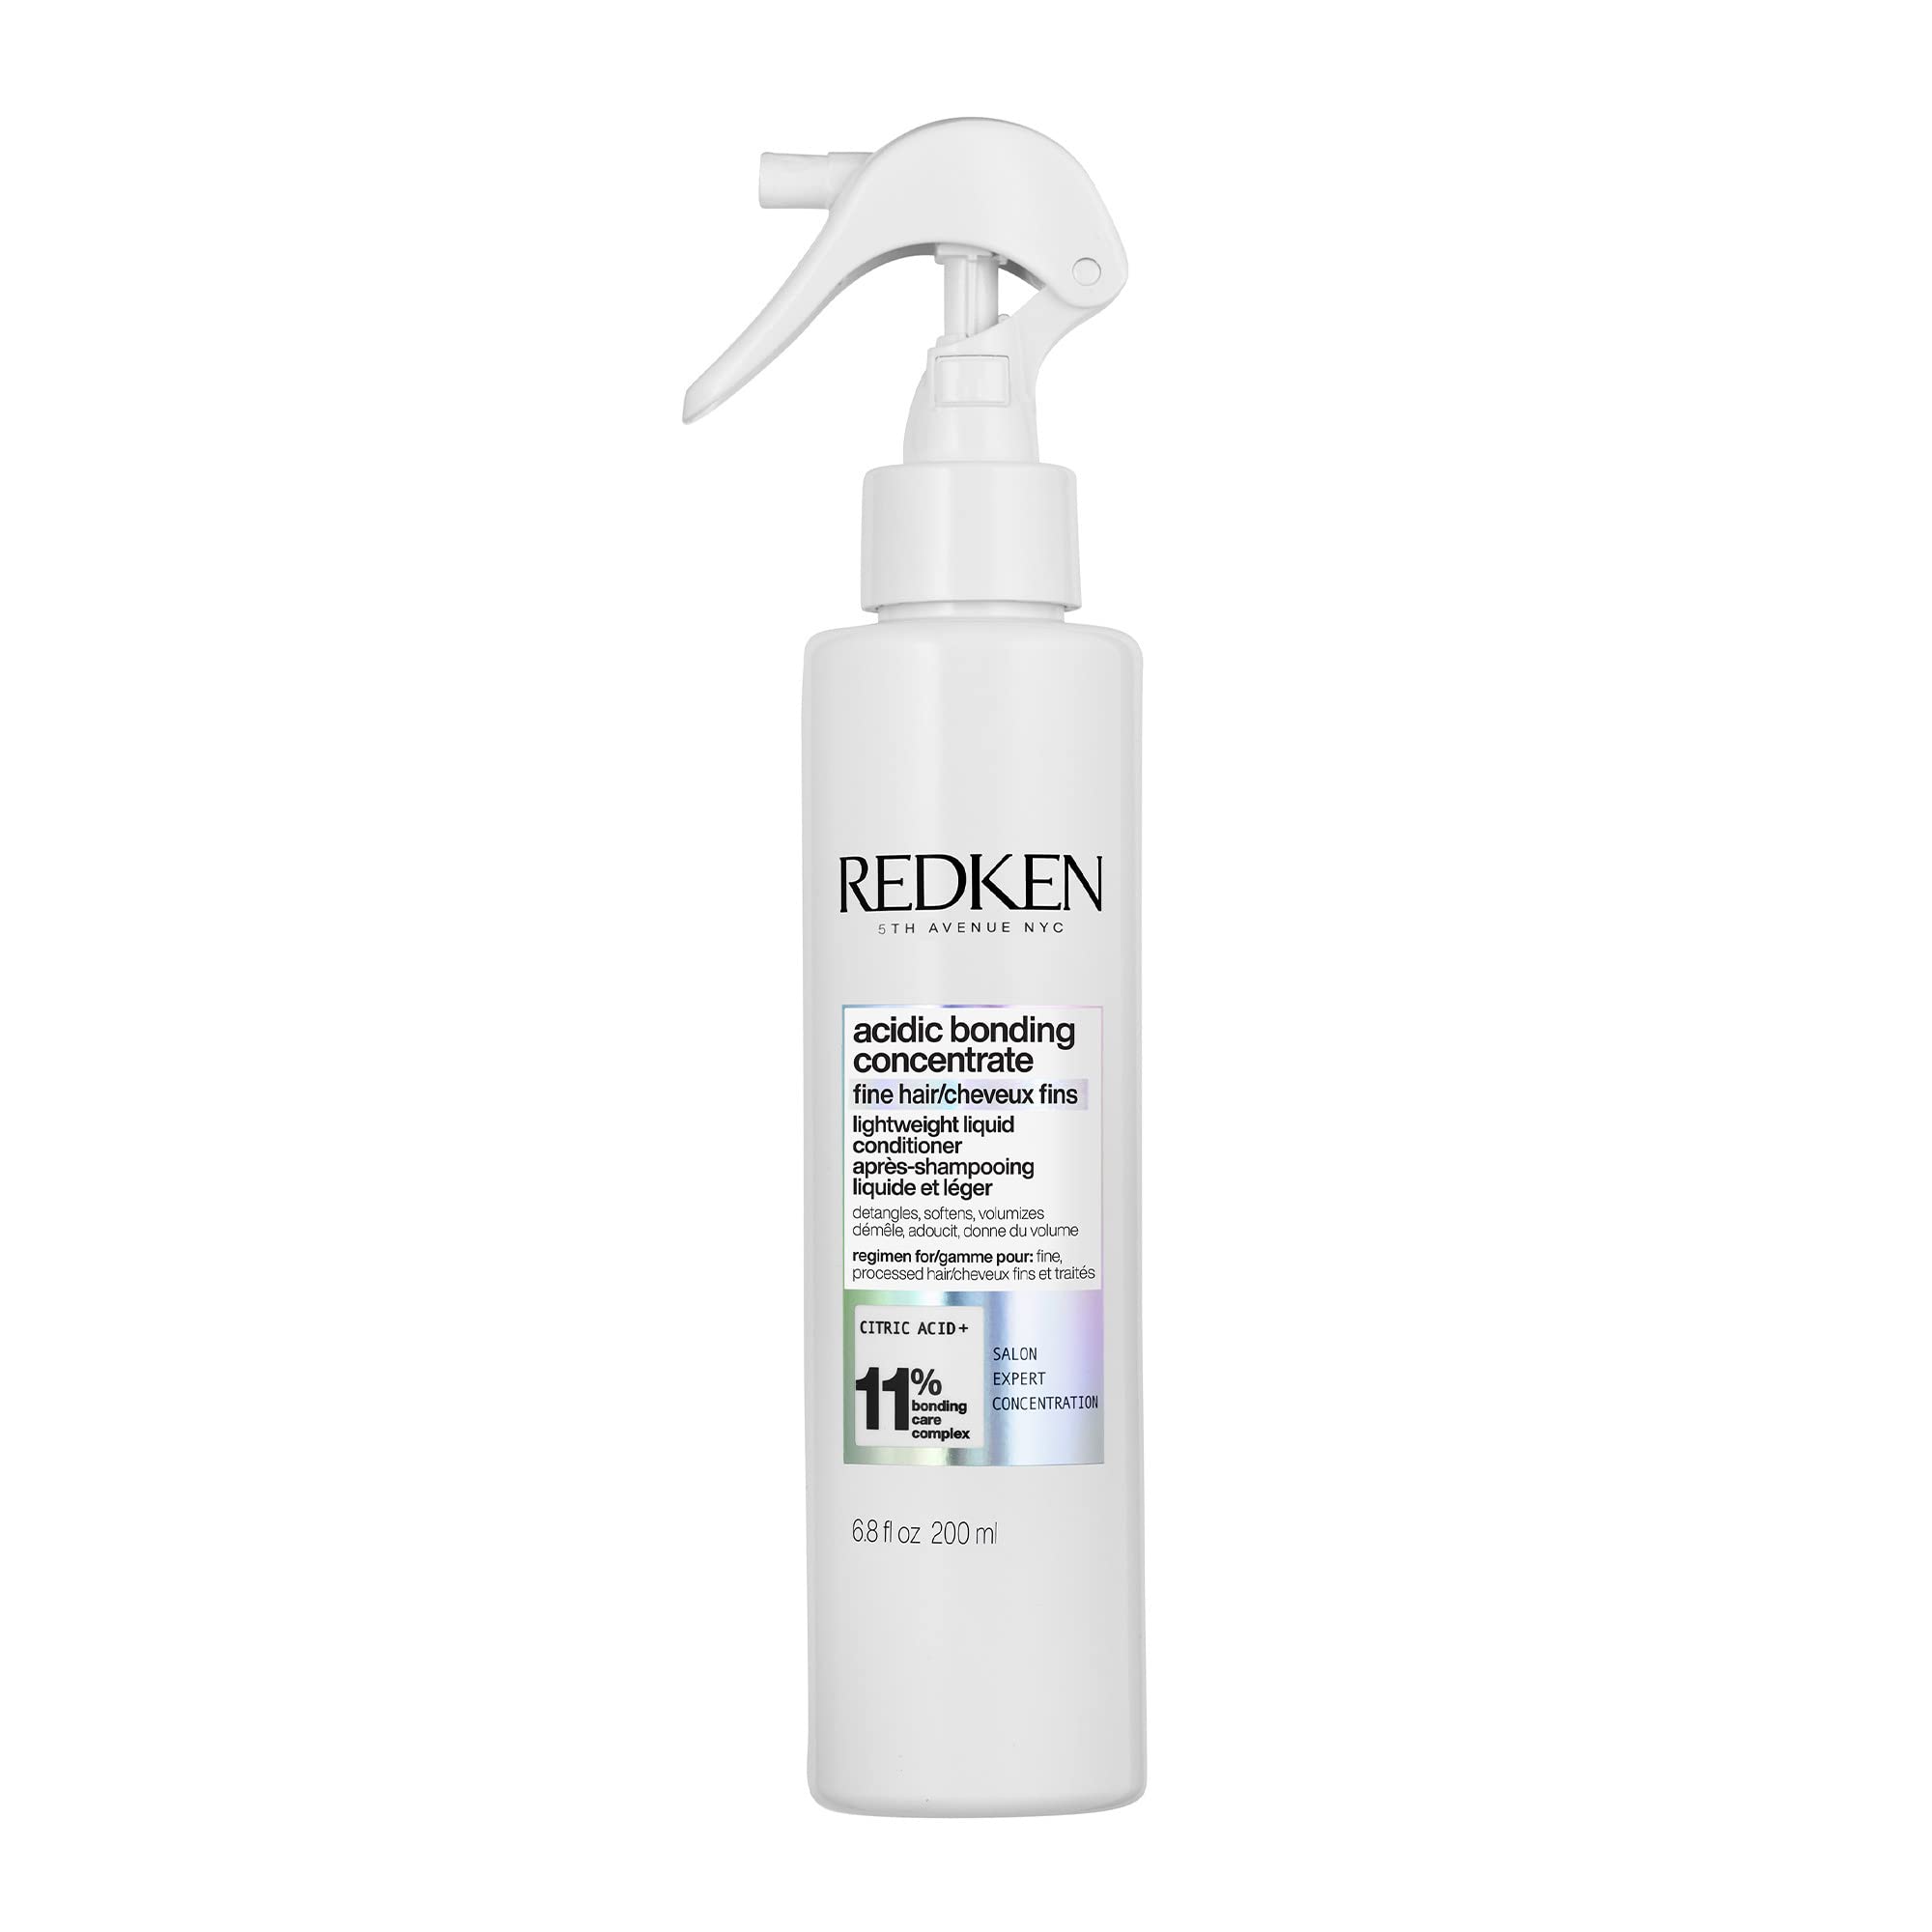 Redken Bonding Lightweight Liquid Conditioner for Damaged Hair Repair | Volumize & Condition | Acidic Bonding Concentrate | Sulfate-Free Spray Conditioner | For Fine or Thin Hair